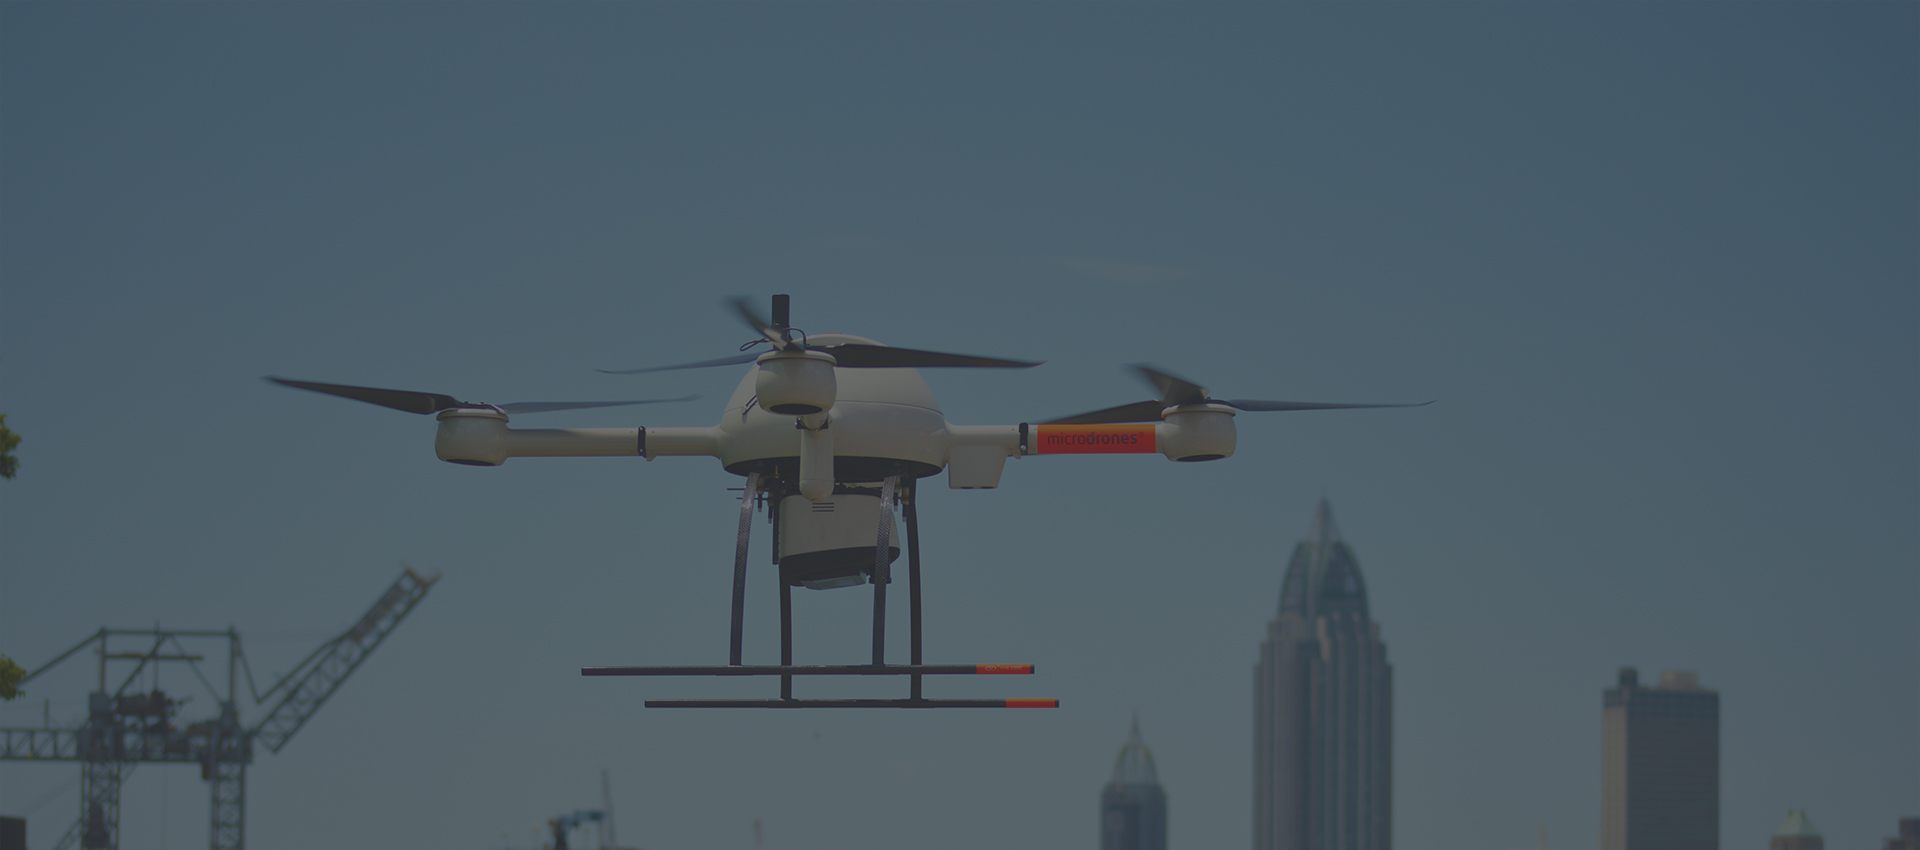 We make surveying smarter with a little help from above.